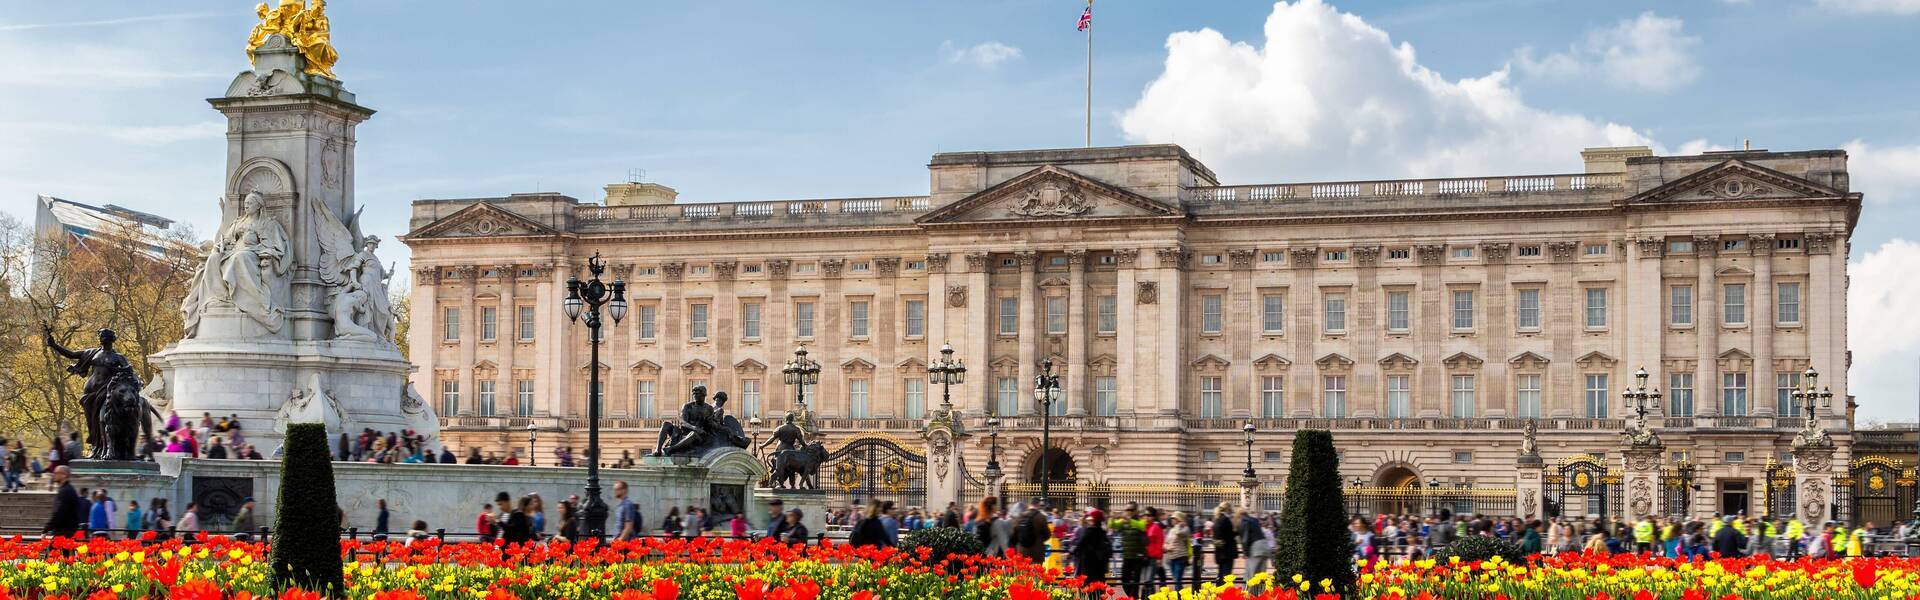 //d337pdvlg6sju5.cloudfront.net/media/buckingham_palace_frontage_with_red_and_yellow_flowers_401_1920x600.jpeg